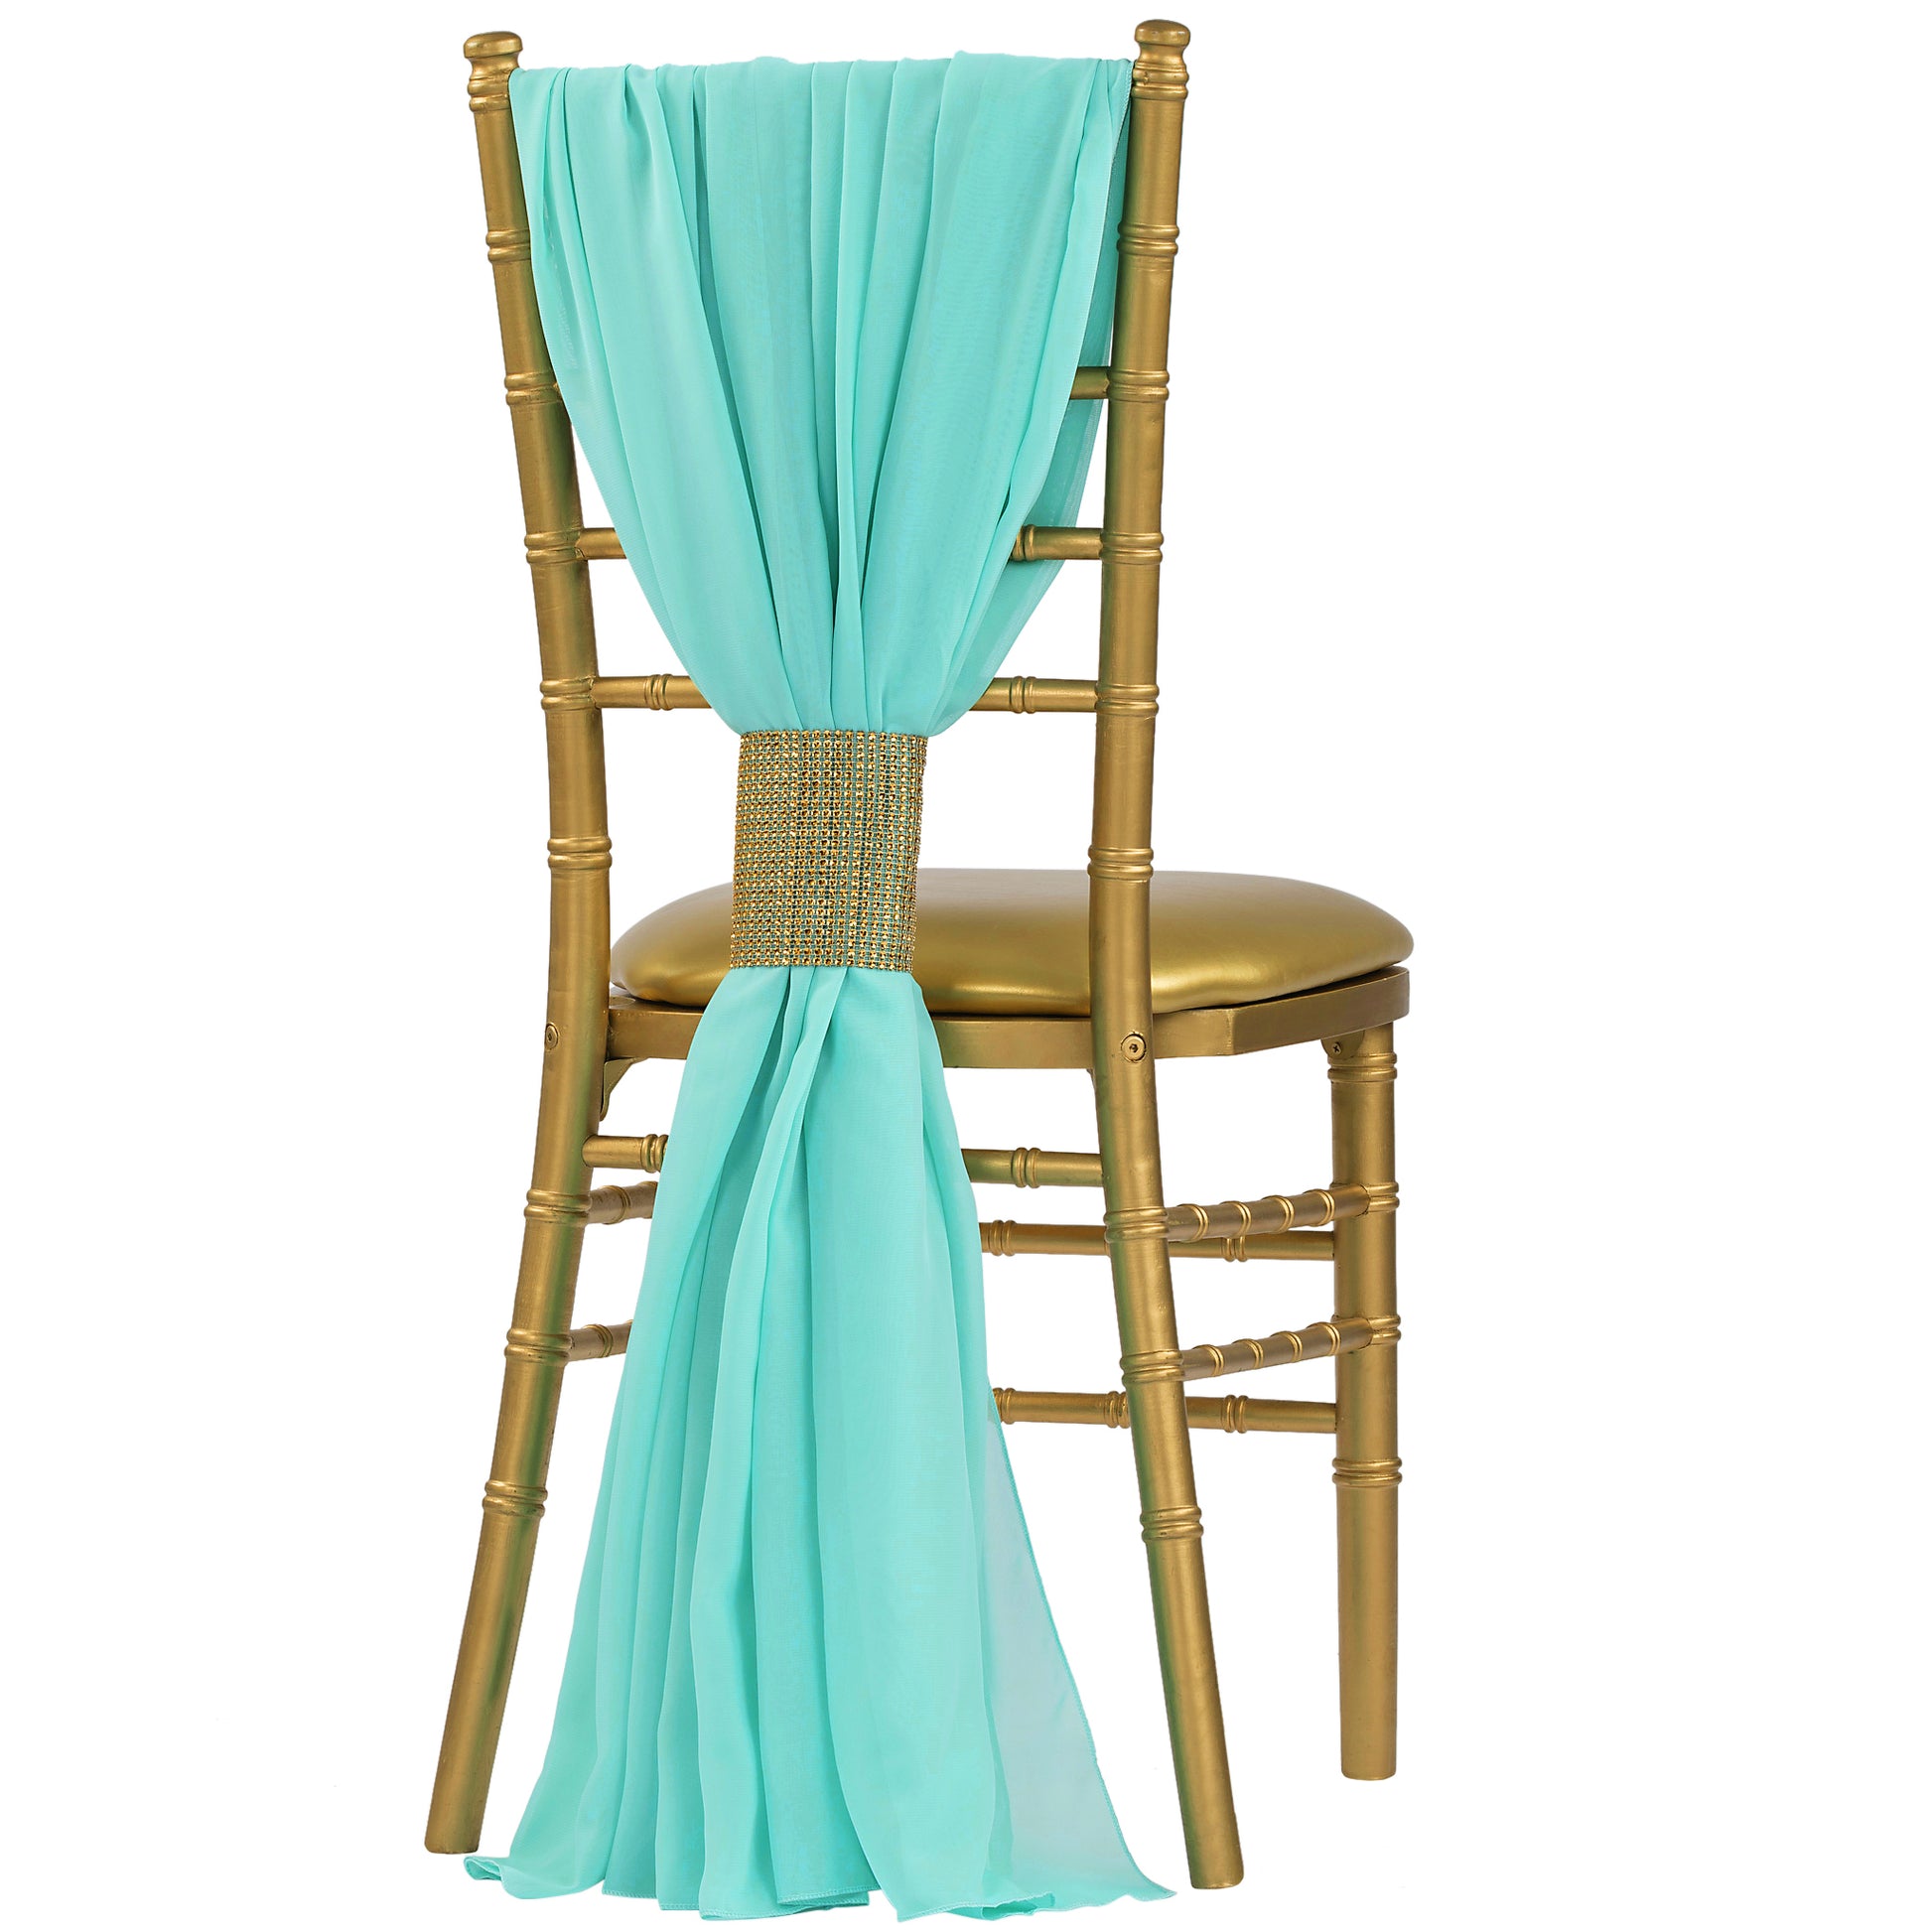 5pcs Pack of Chiffon Chair Sashes/Ties - Turquoise - CV Linens